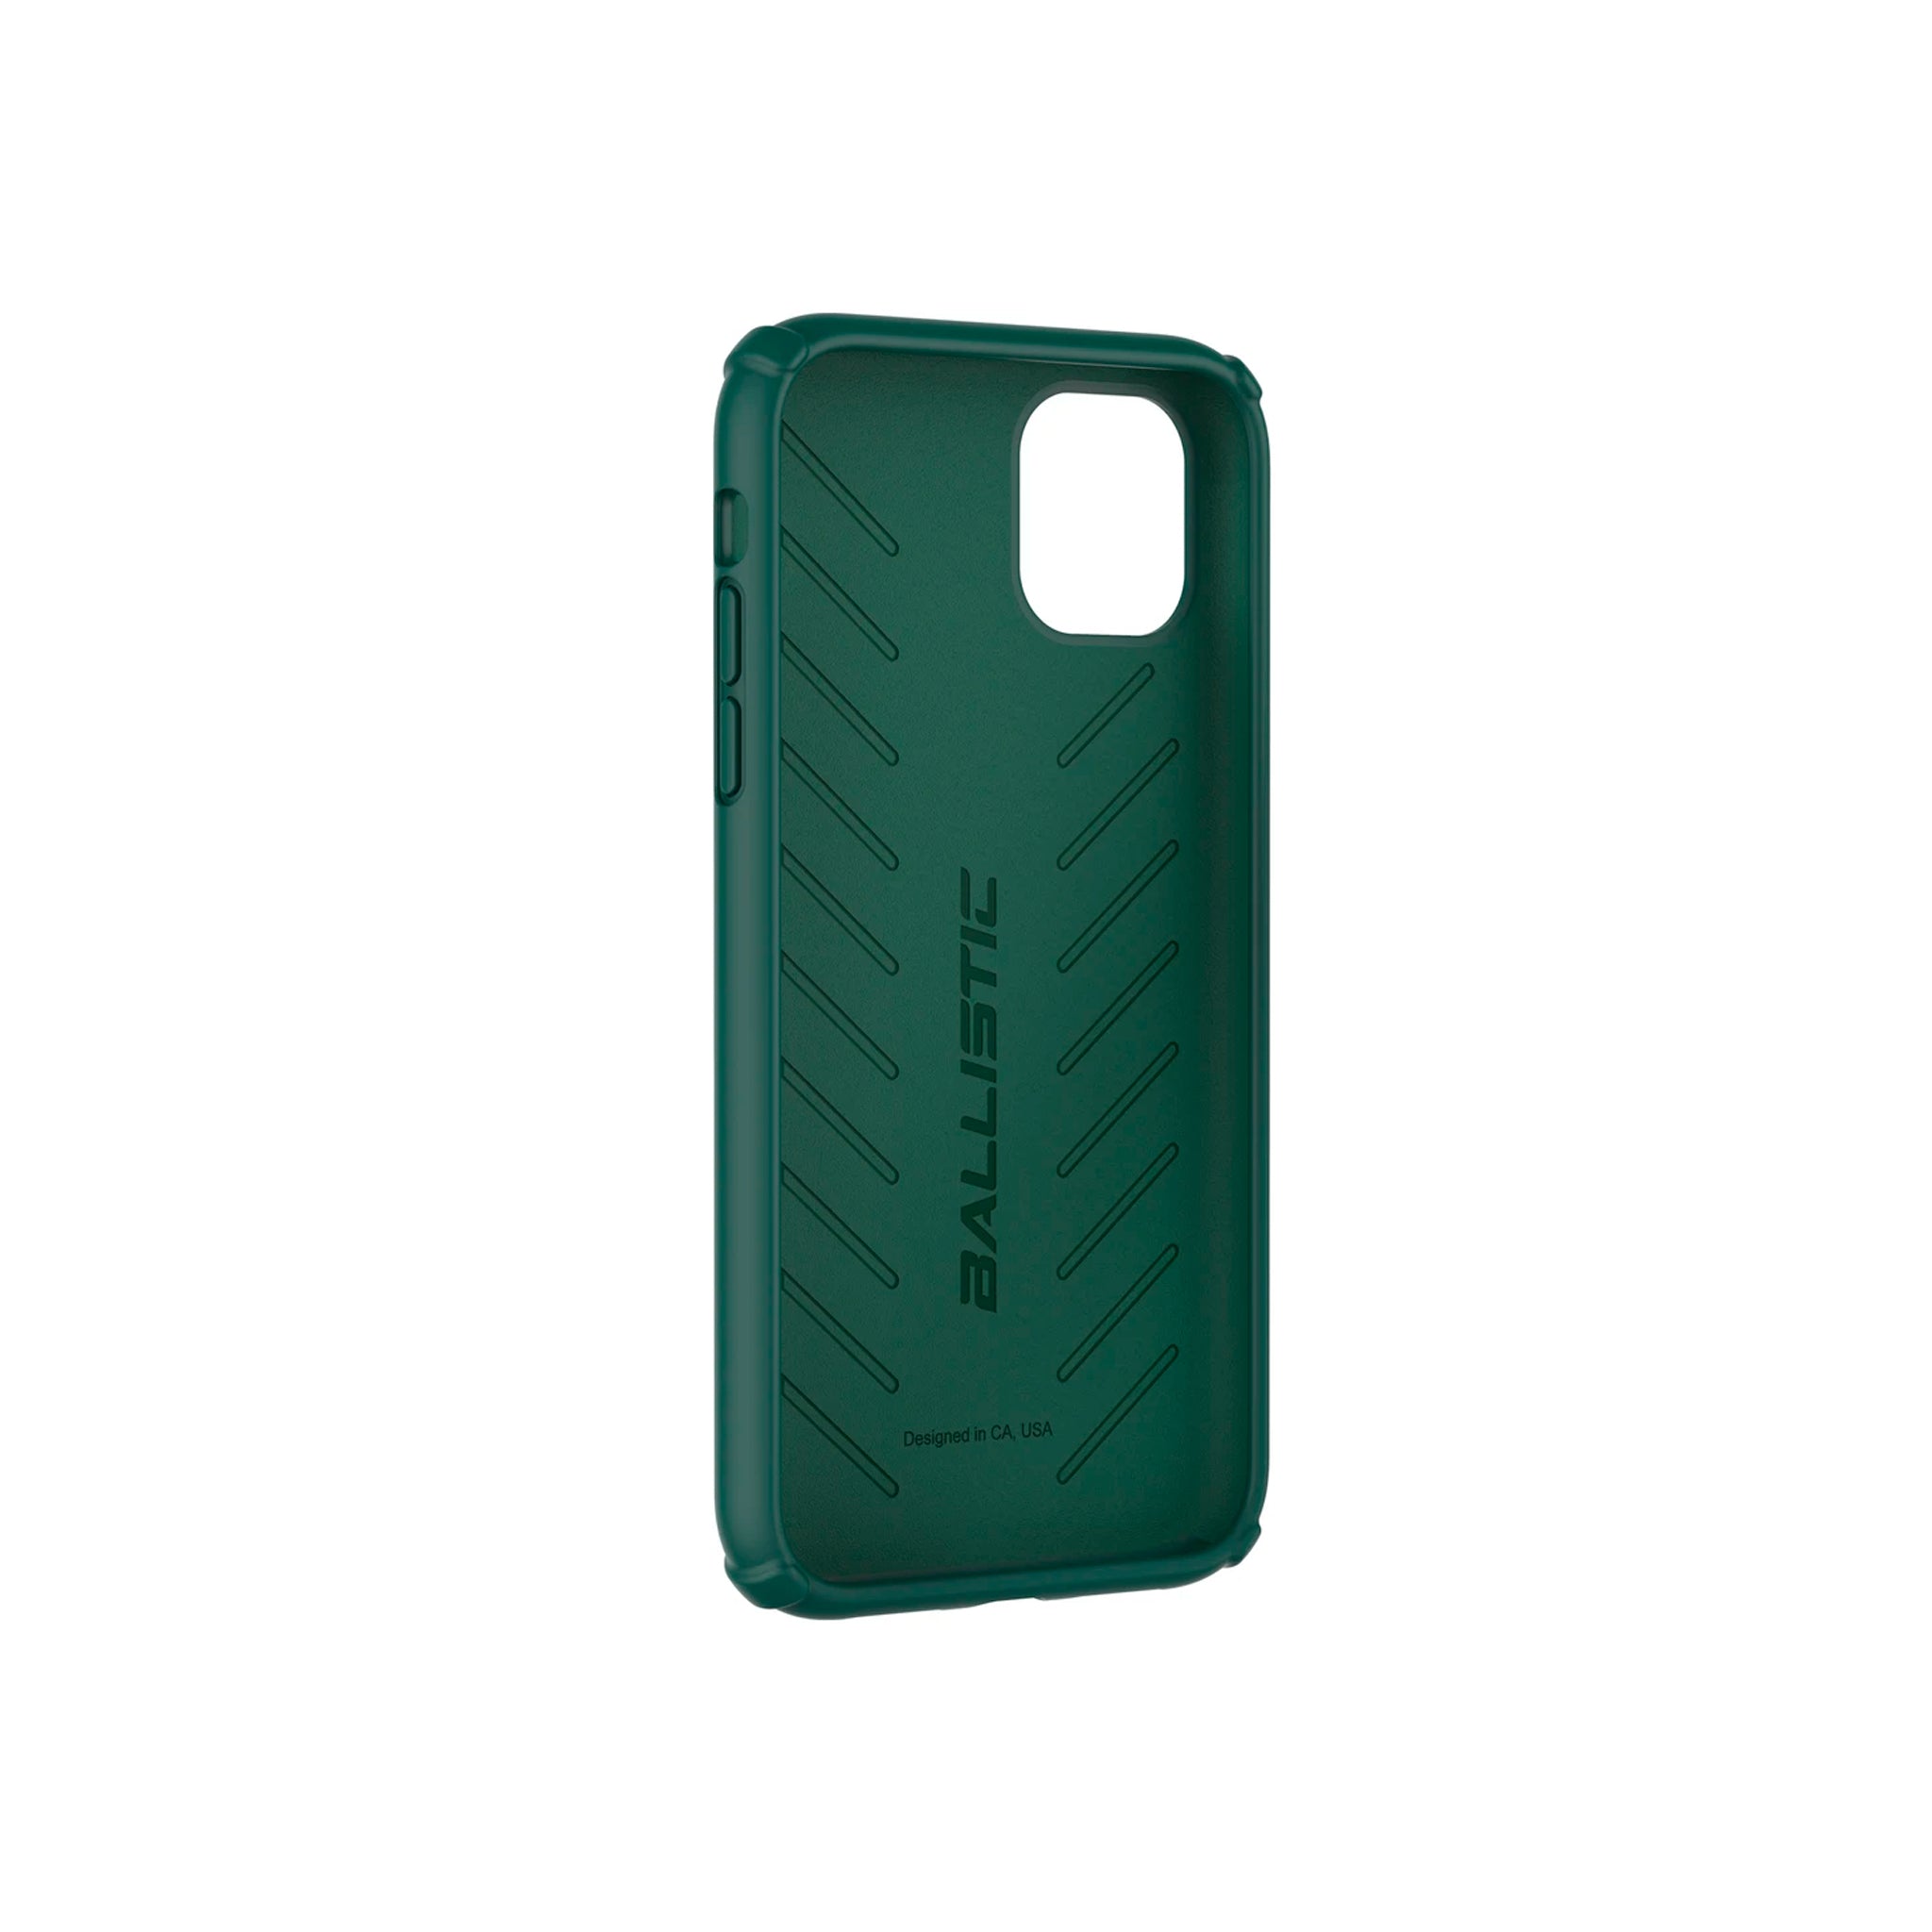 Ballistic - Soft Jacket Series for iPhone 11  - Green